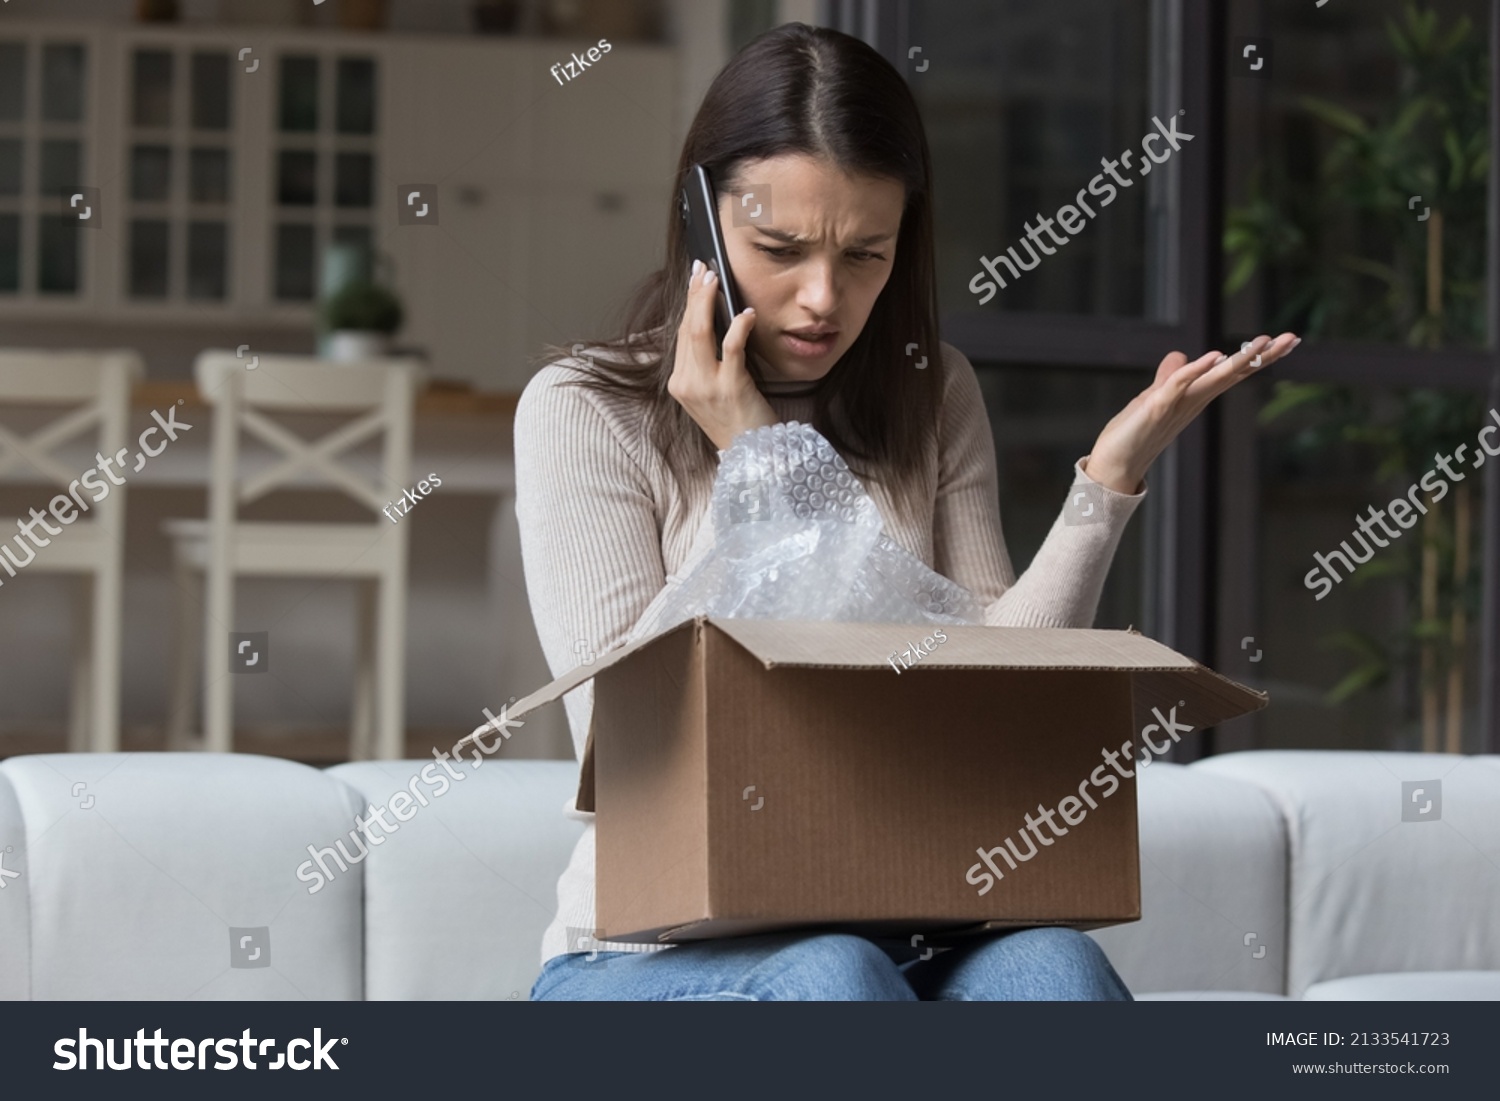 Dissatisfied angry woman, cheated client sit on sofa check received box, damaged or broken goods in parcel, talks to customers support, express complaints, looks annoyed. Bad delivery services concept #2133541723